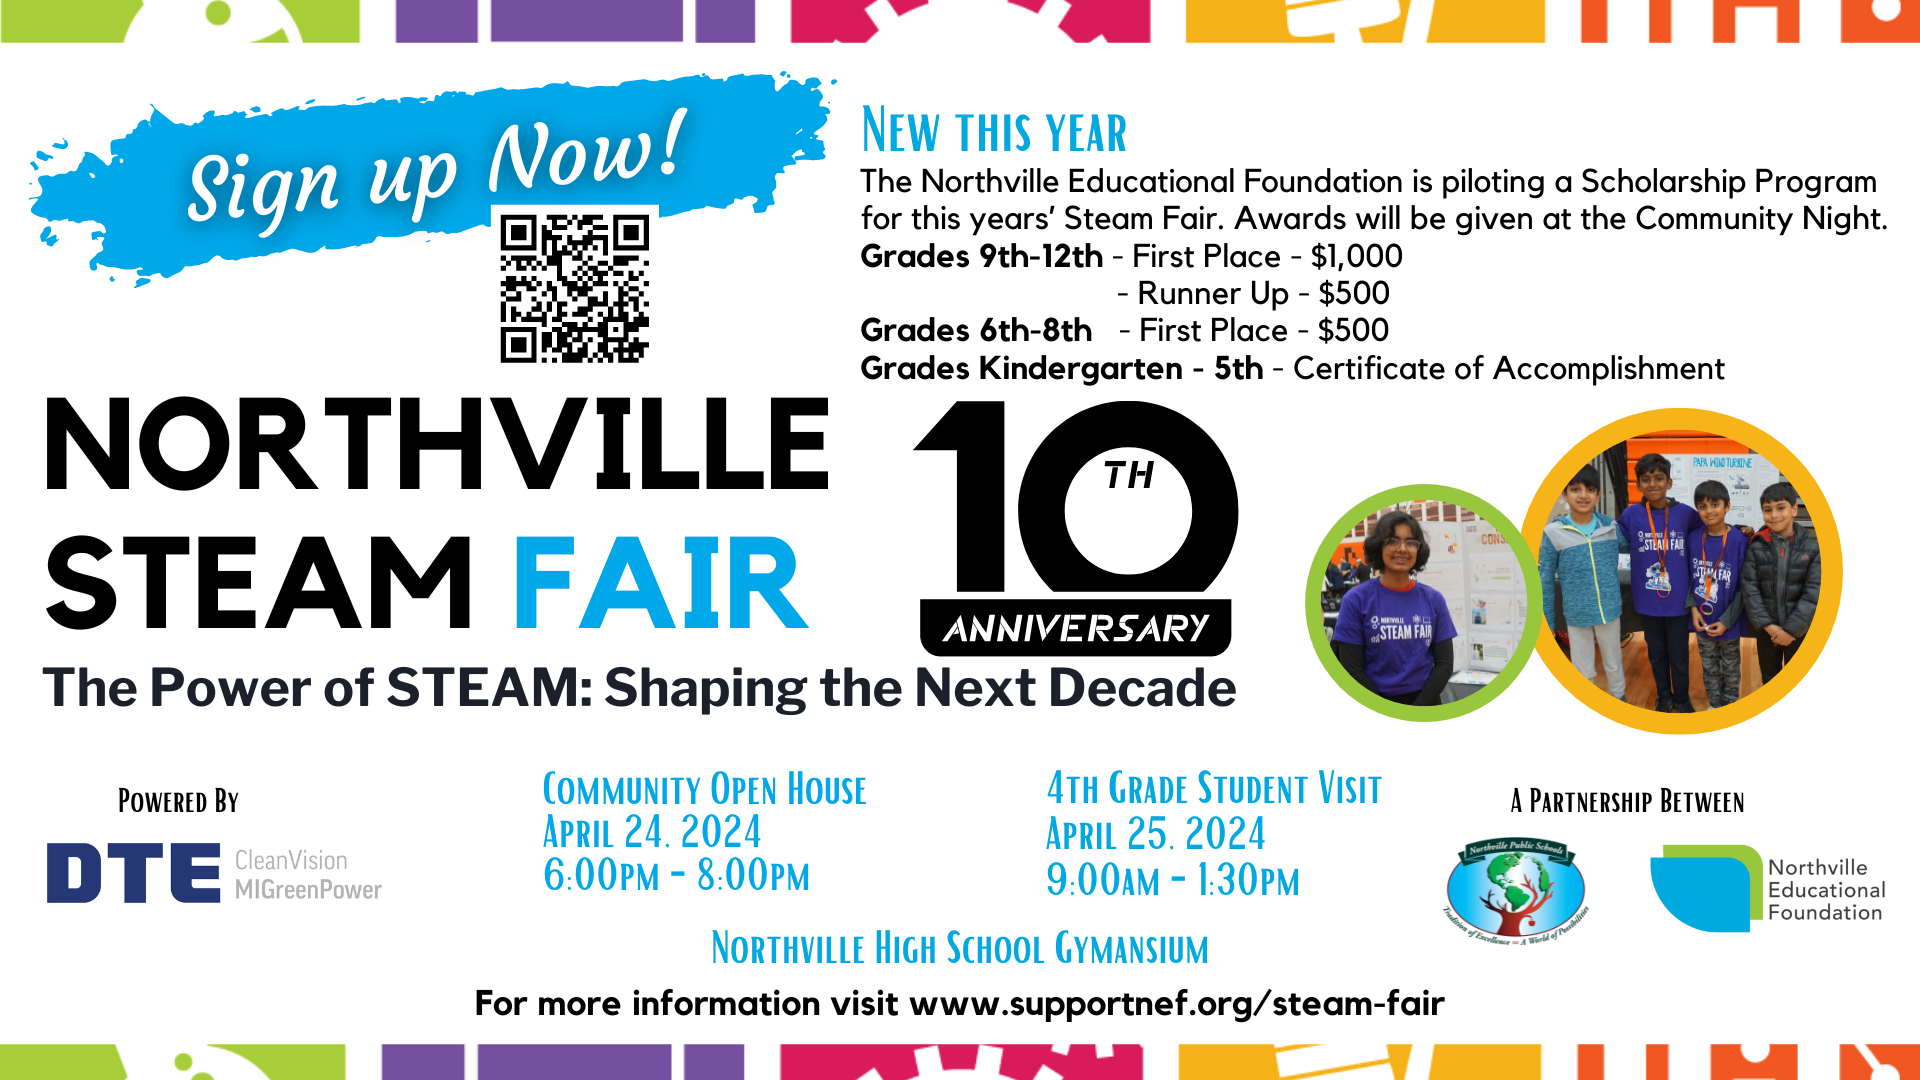 Save the Date: Northvile STEAM Fair - 10th Anniversary - The power of STEAM: Shaping the Next Decade. New this Year: The Northville Educational Foundation is piloting a scholarship program for this year's STEAM Fair. Awards will be given at the Community Night. Grades 9th-12th: First Place, $1,000 - Runner Up, $500. Grades 6th-8th: First Place, $500. Grades Kindergarten-5th: Certificate of Accomplishment. Community Open House on April 24, 2024, 6-8pm. 4th Grade Student Visit is on April 25, 2024, 9am-130pm. Powered by DTE CleanVision MI GreenPower. A partnership between Northville Public Schools and Northville Educational Foundation. For more information, visit www.supportnef.org/steam-fair  